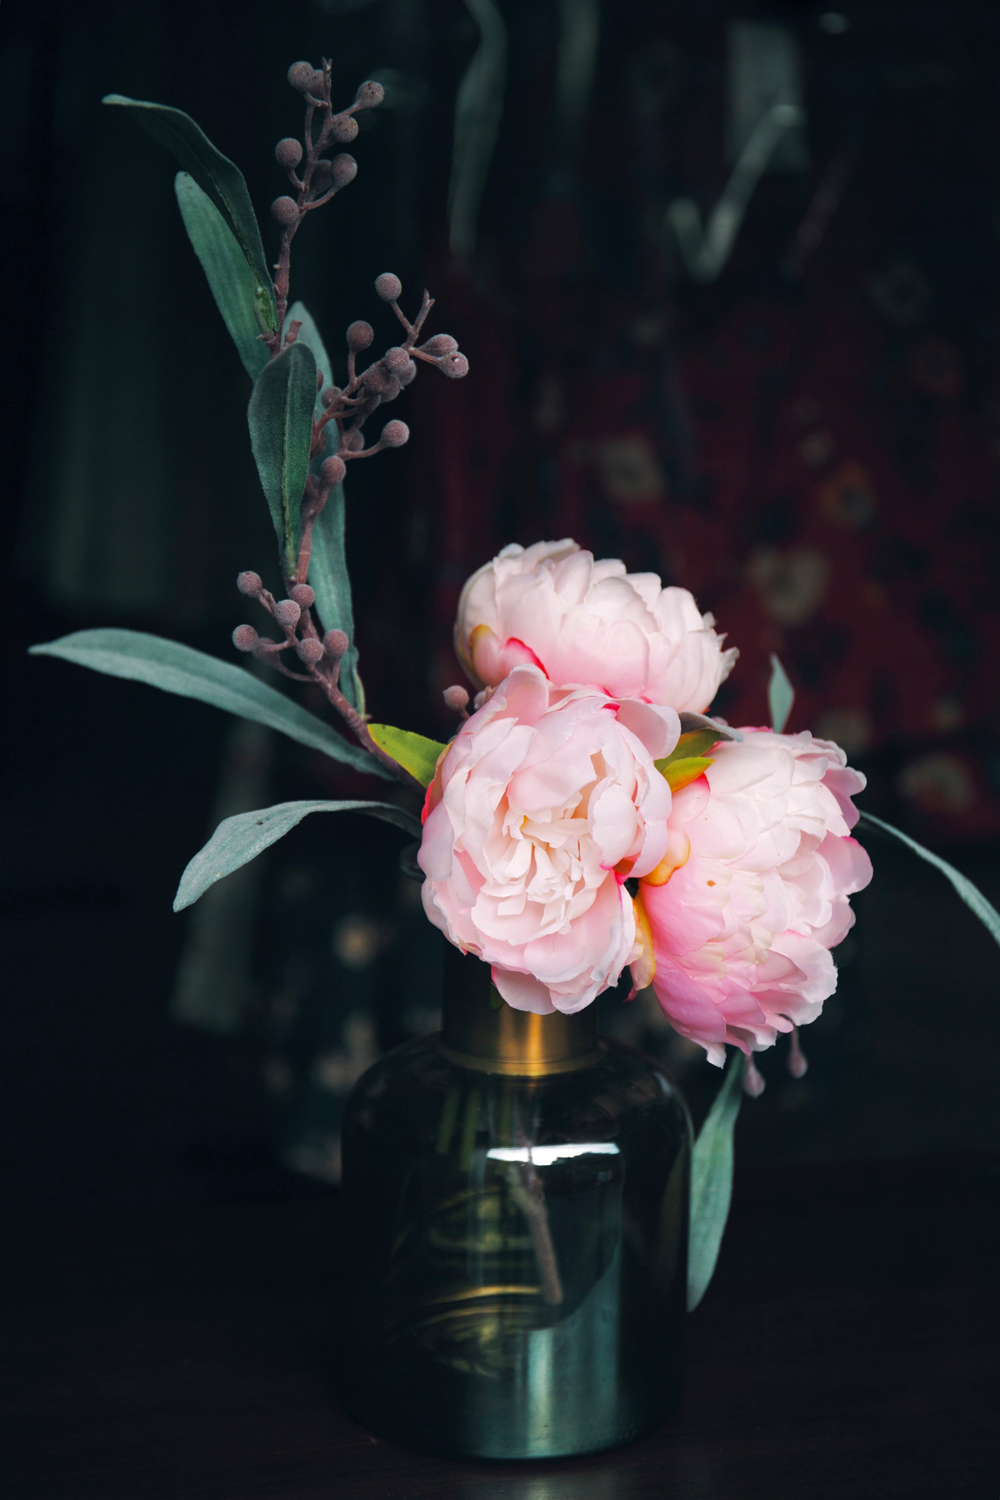 A tiny vase with a few peony flowers inside